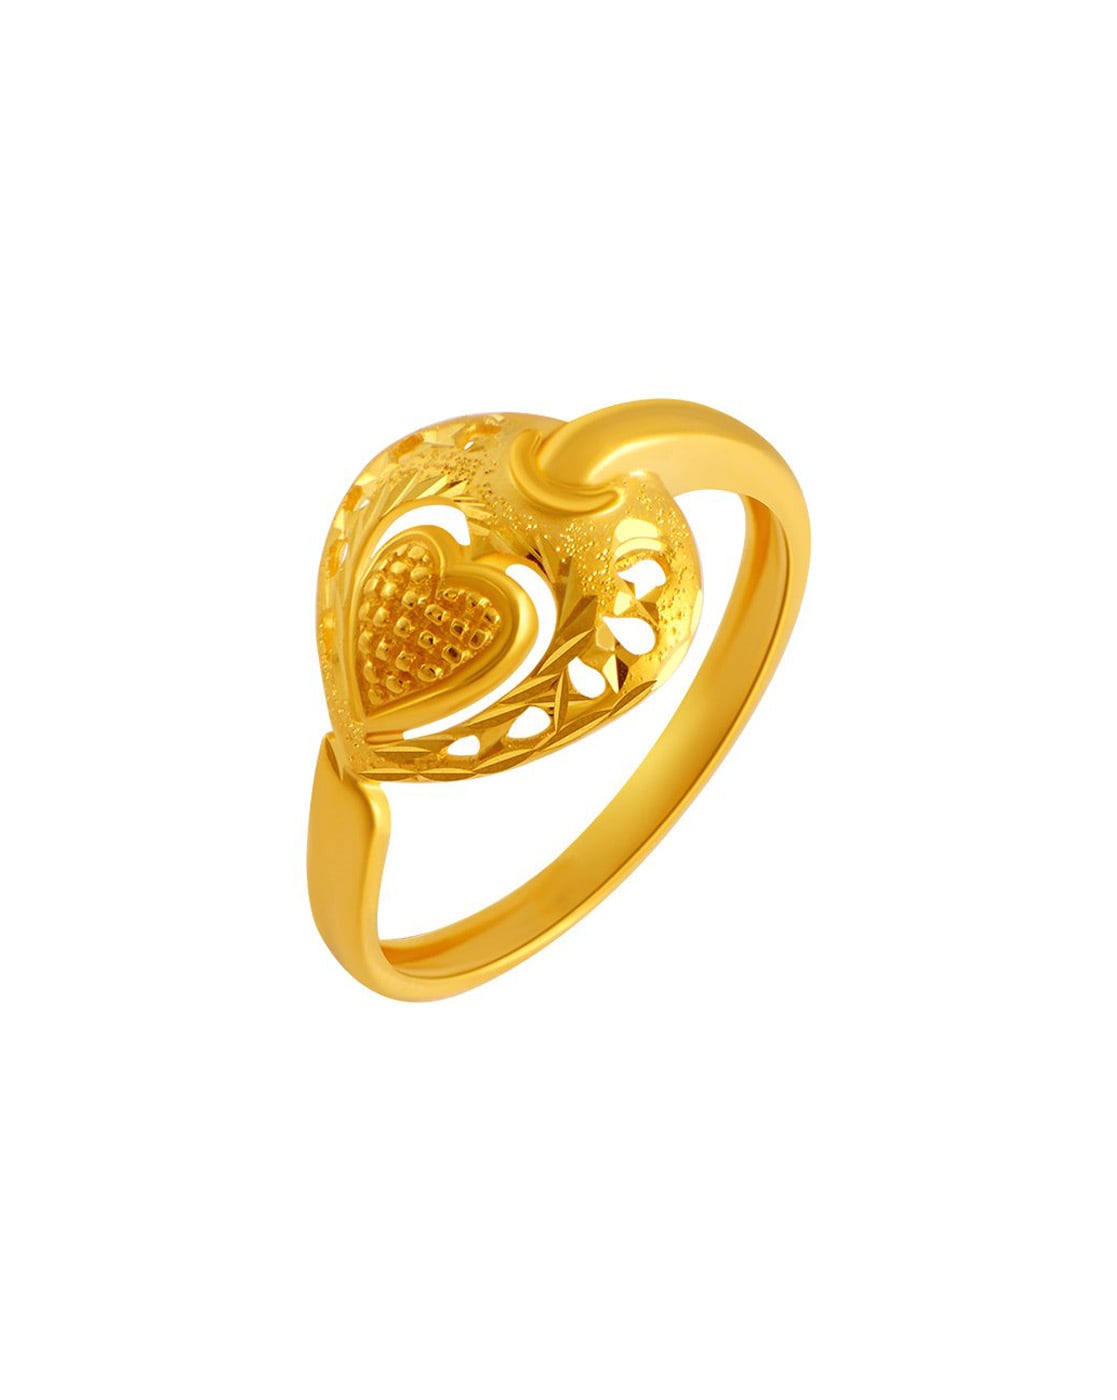 Buy P.C. Chandra Jewellers 22KT(916) Yellow Gold Floral Mesh Gold Finger  Ring for Women at Amazon.in